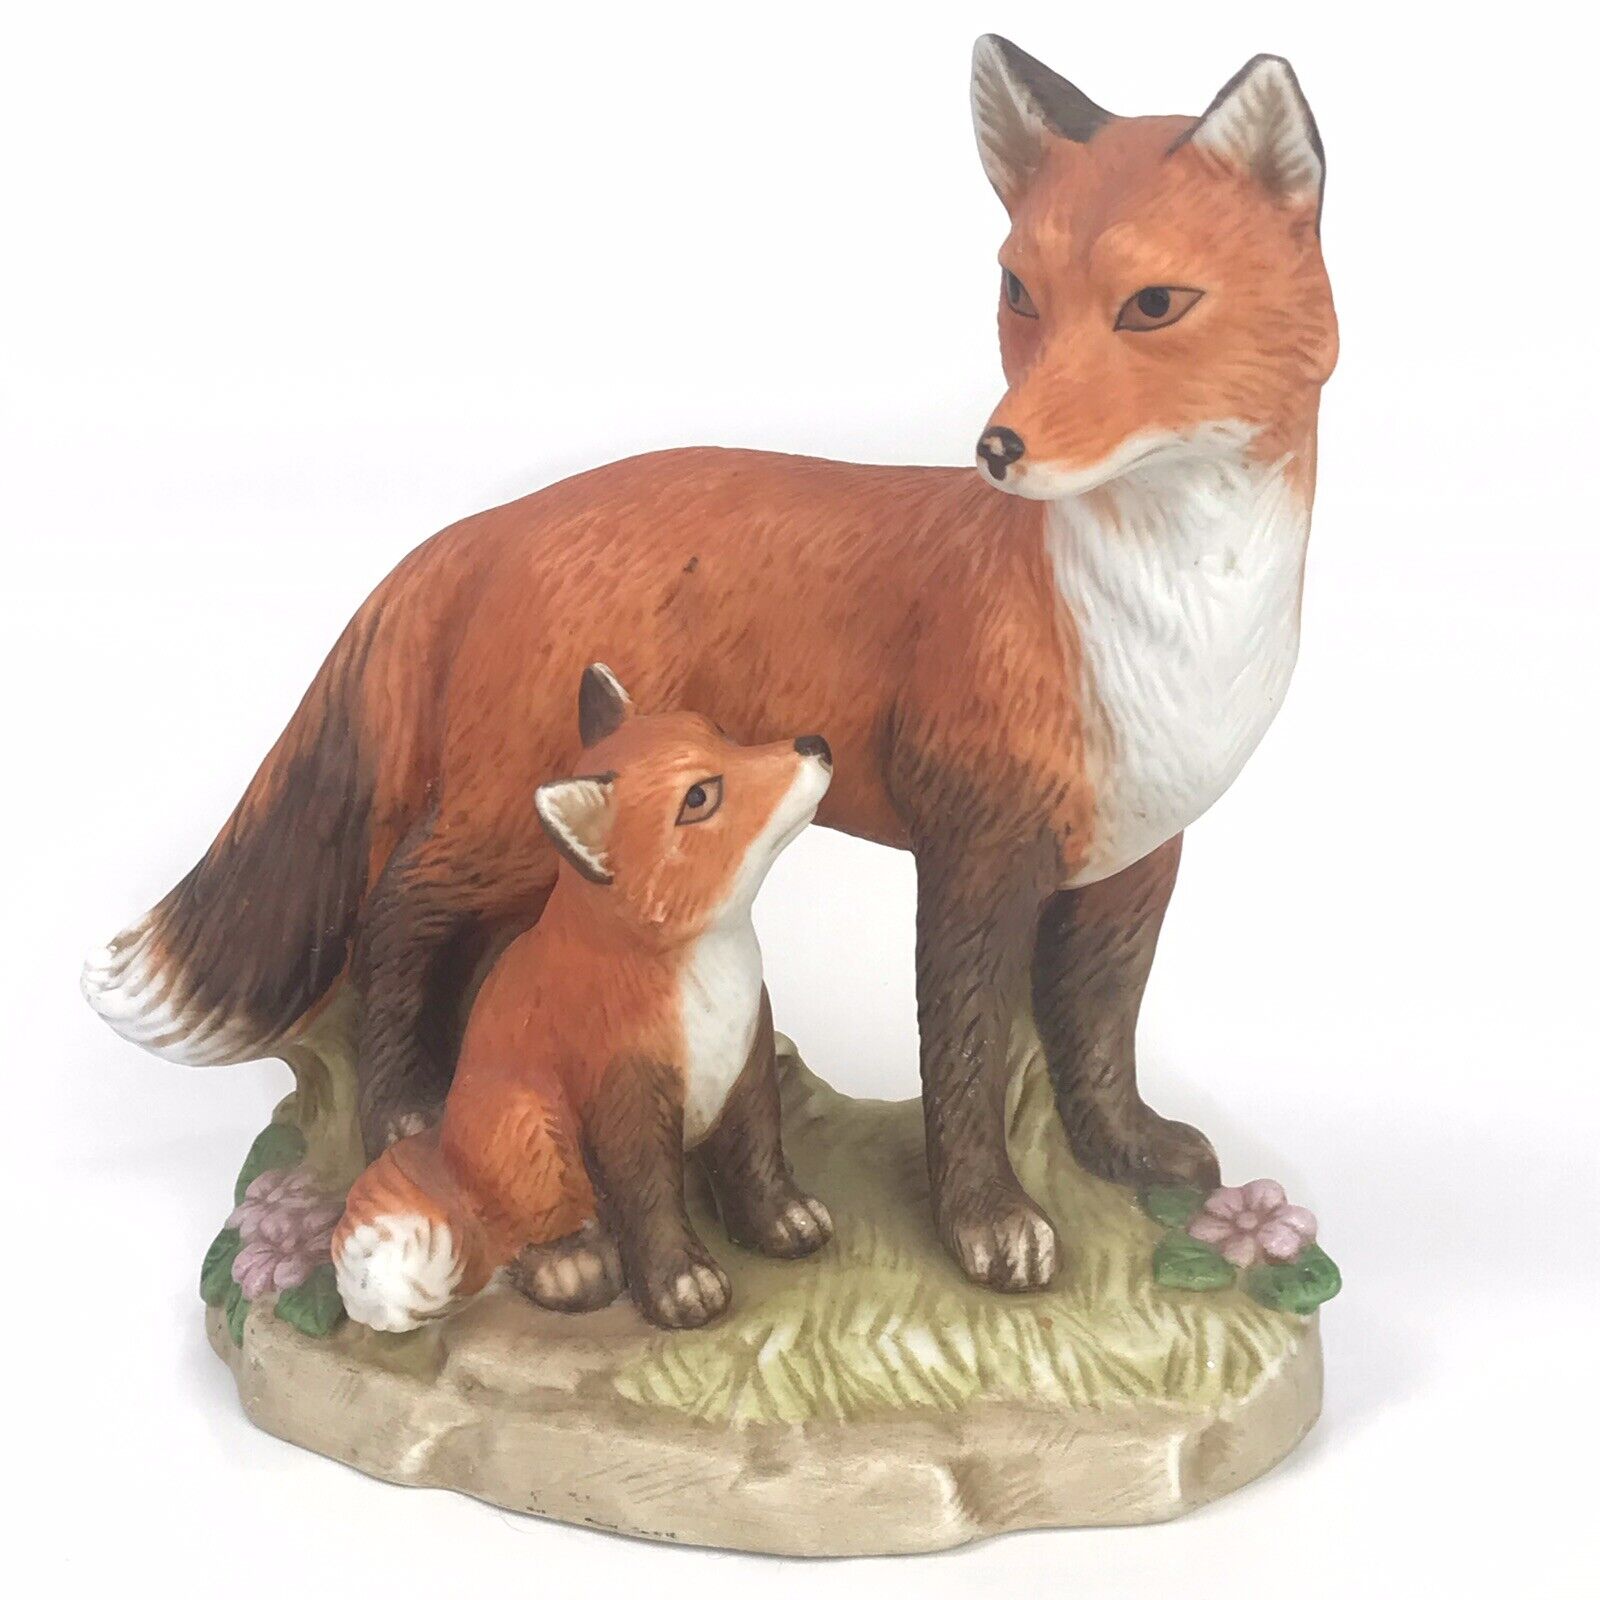 Vintage Red Fox Mom And Baby Kit Figurine HOMCO 1417 - 4.5” Tall